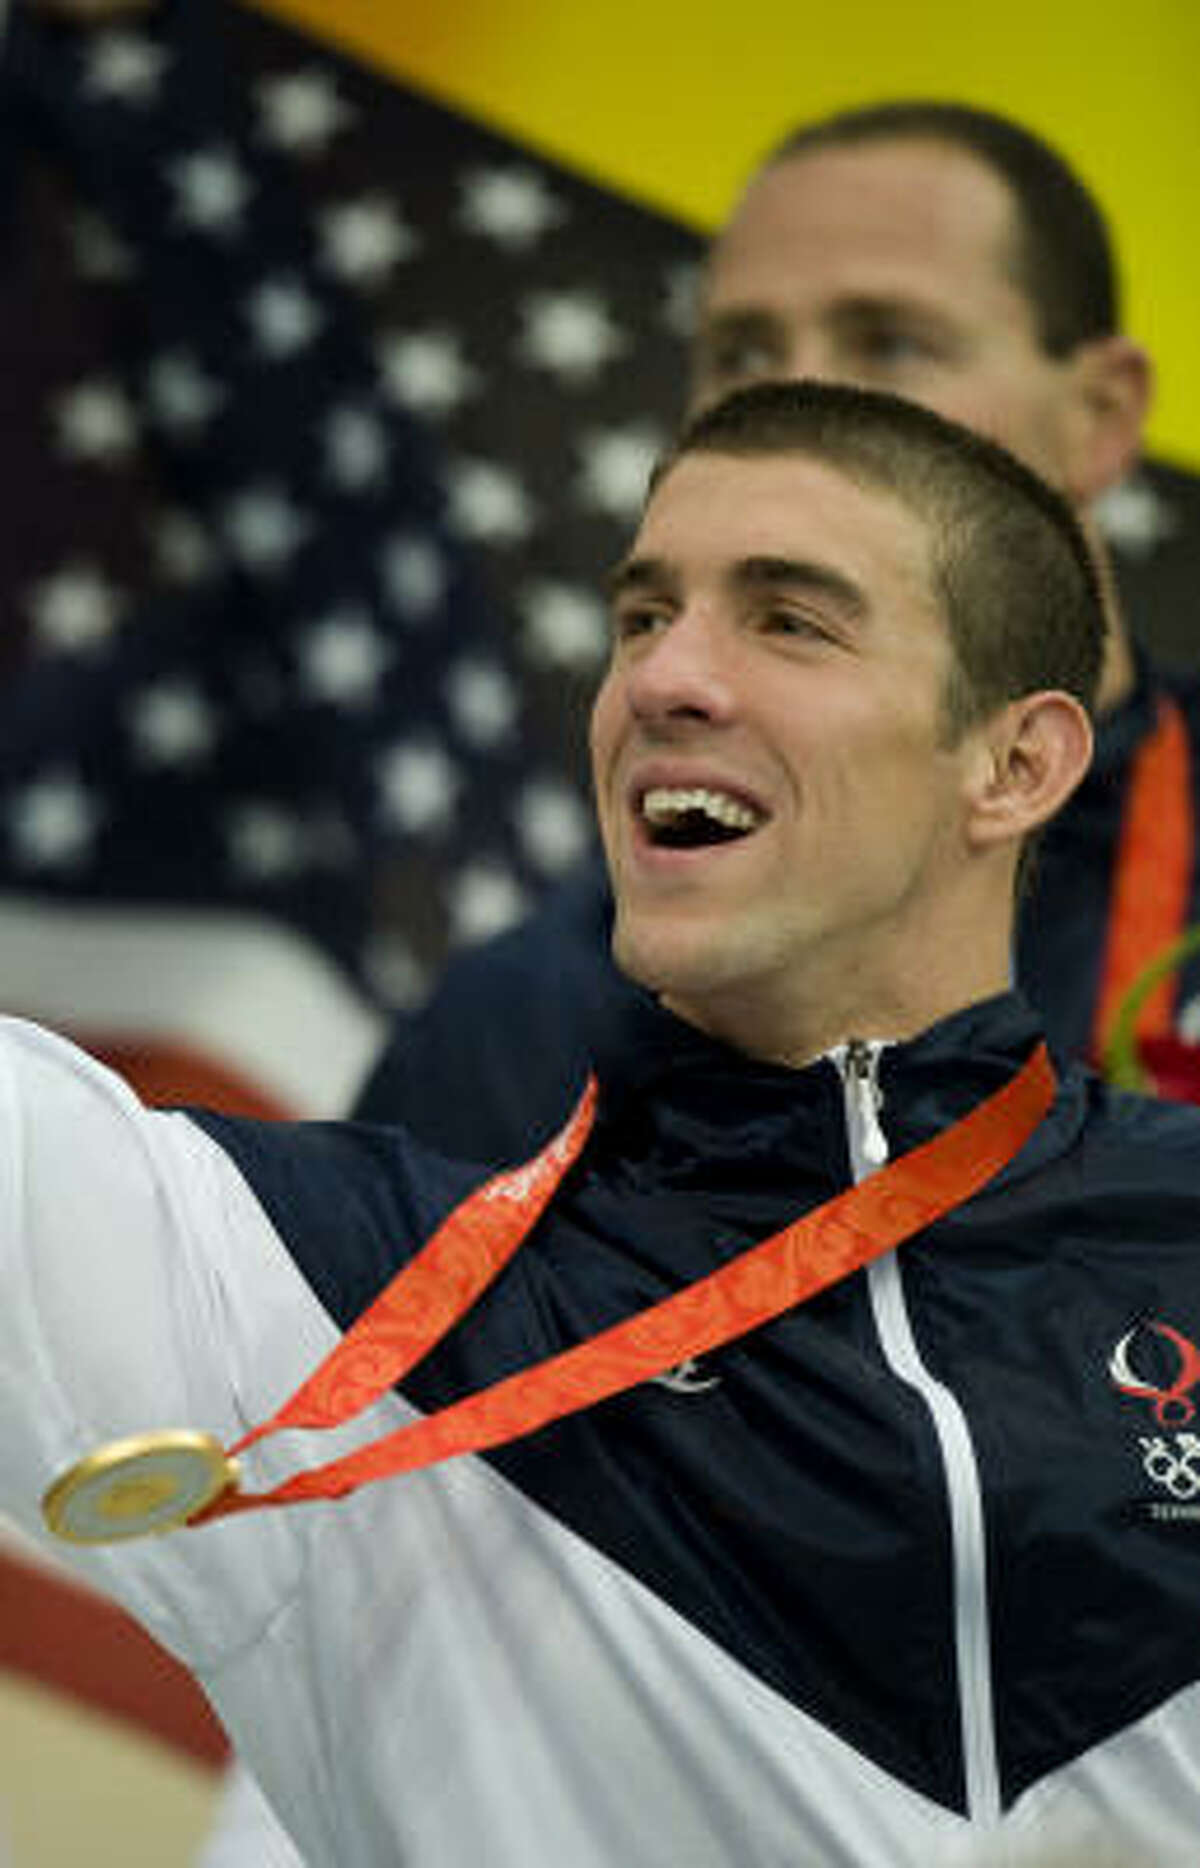 August 17: Michael Phelps celebrates his record 8th gold medal in Beijing after the U.S. won the men's 4X100m medley relay.